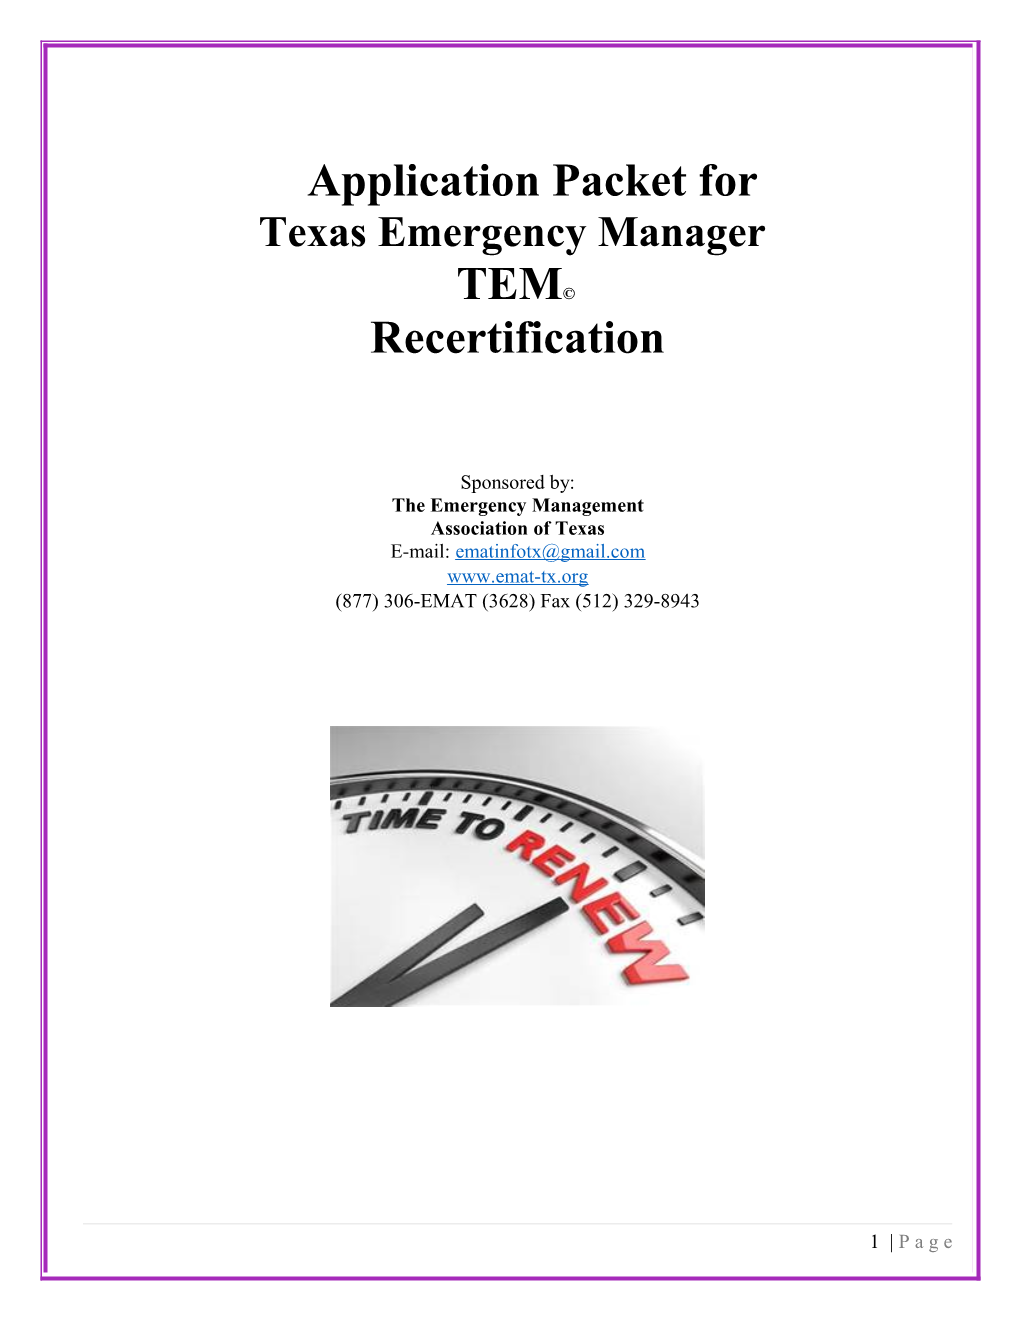 Application Packet For